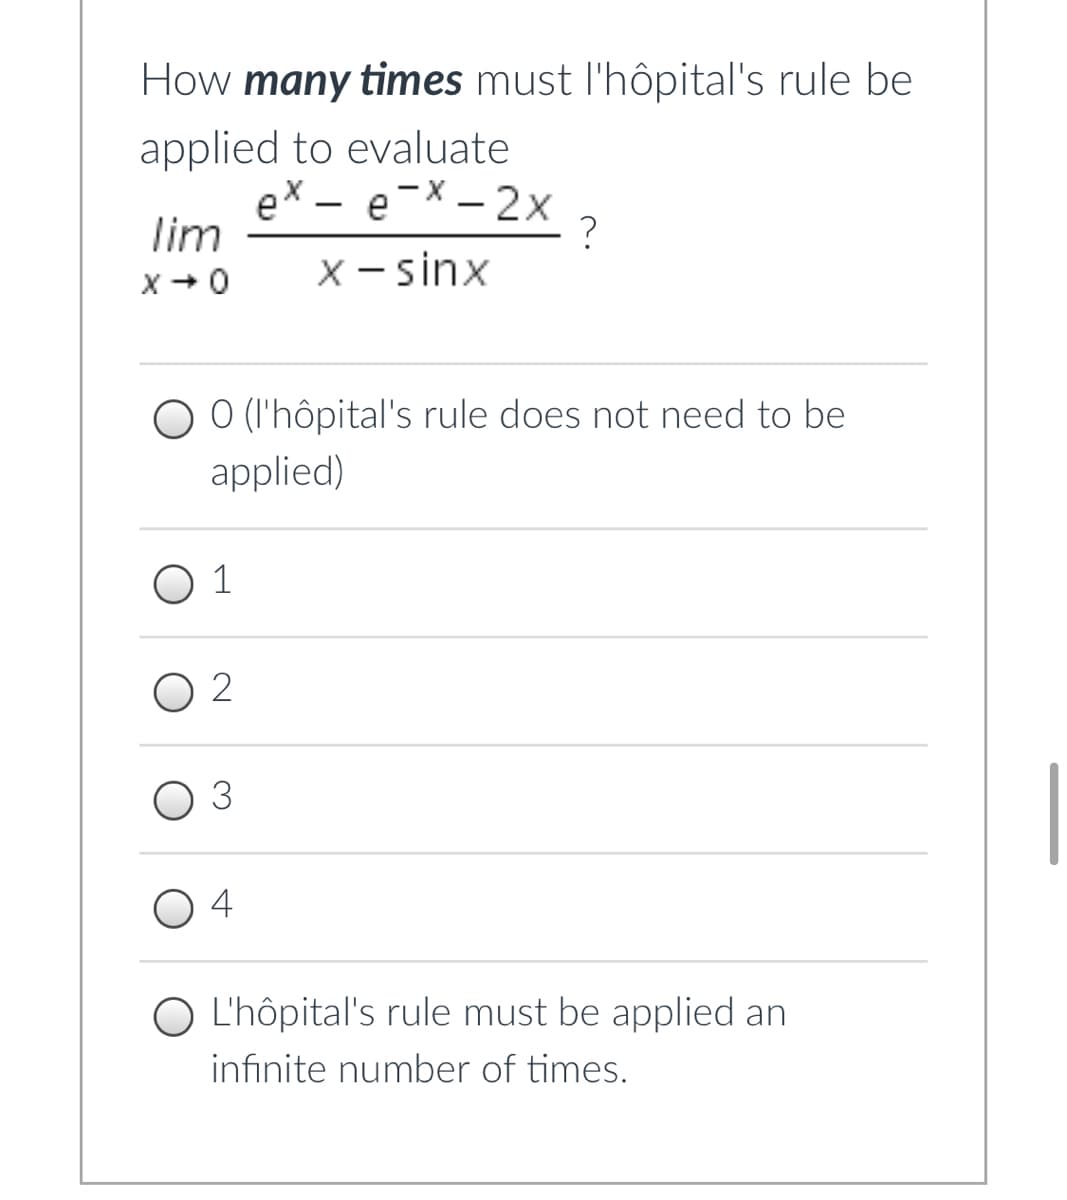 How many times must l'hôpital's rule be
applied to evaluate
ex - e-X – 2x
lim
?
X+ 0
X - sinx
O O (l'hôpital's rule does not need to be
applied)
O 1
O 2
O 4
O L'hôpital's rule must be applied an
infinite number of times.
